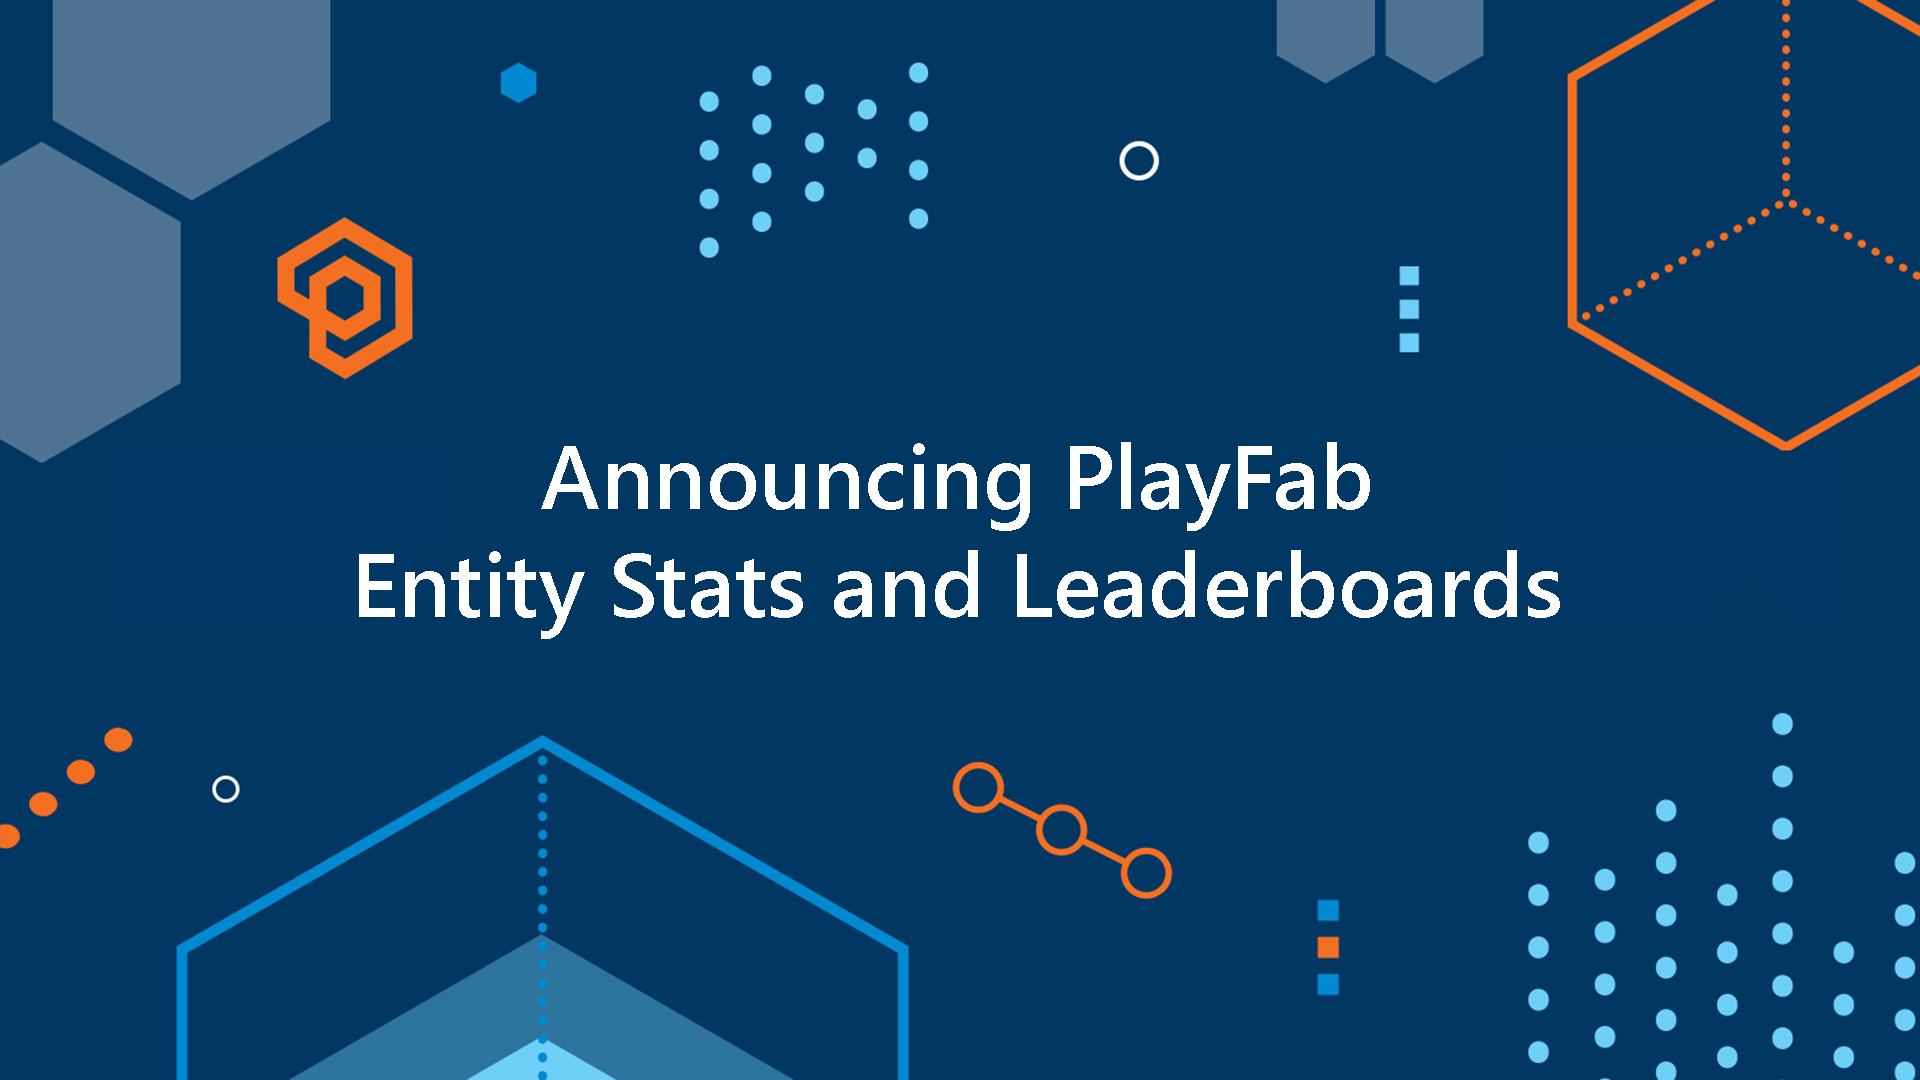 PlayFab Entity Stats and Leaderboards hero image